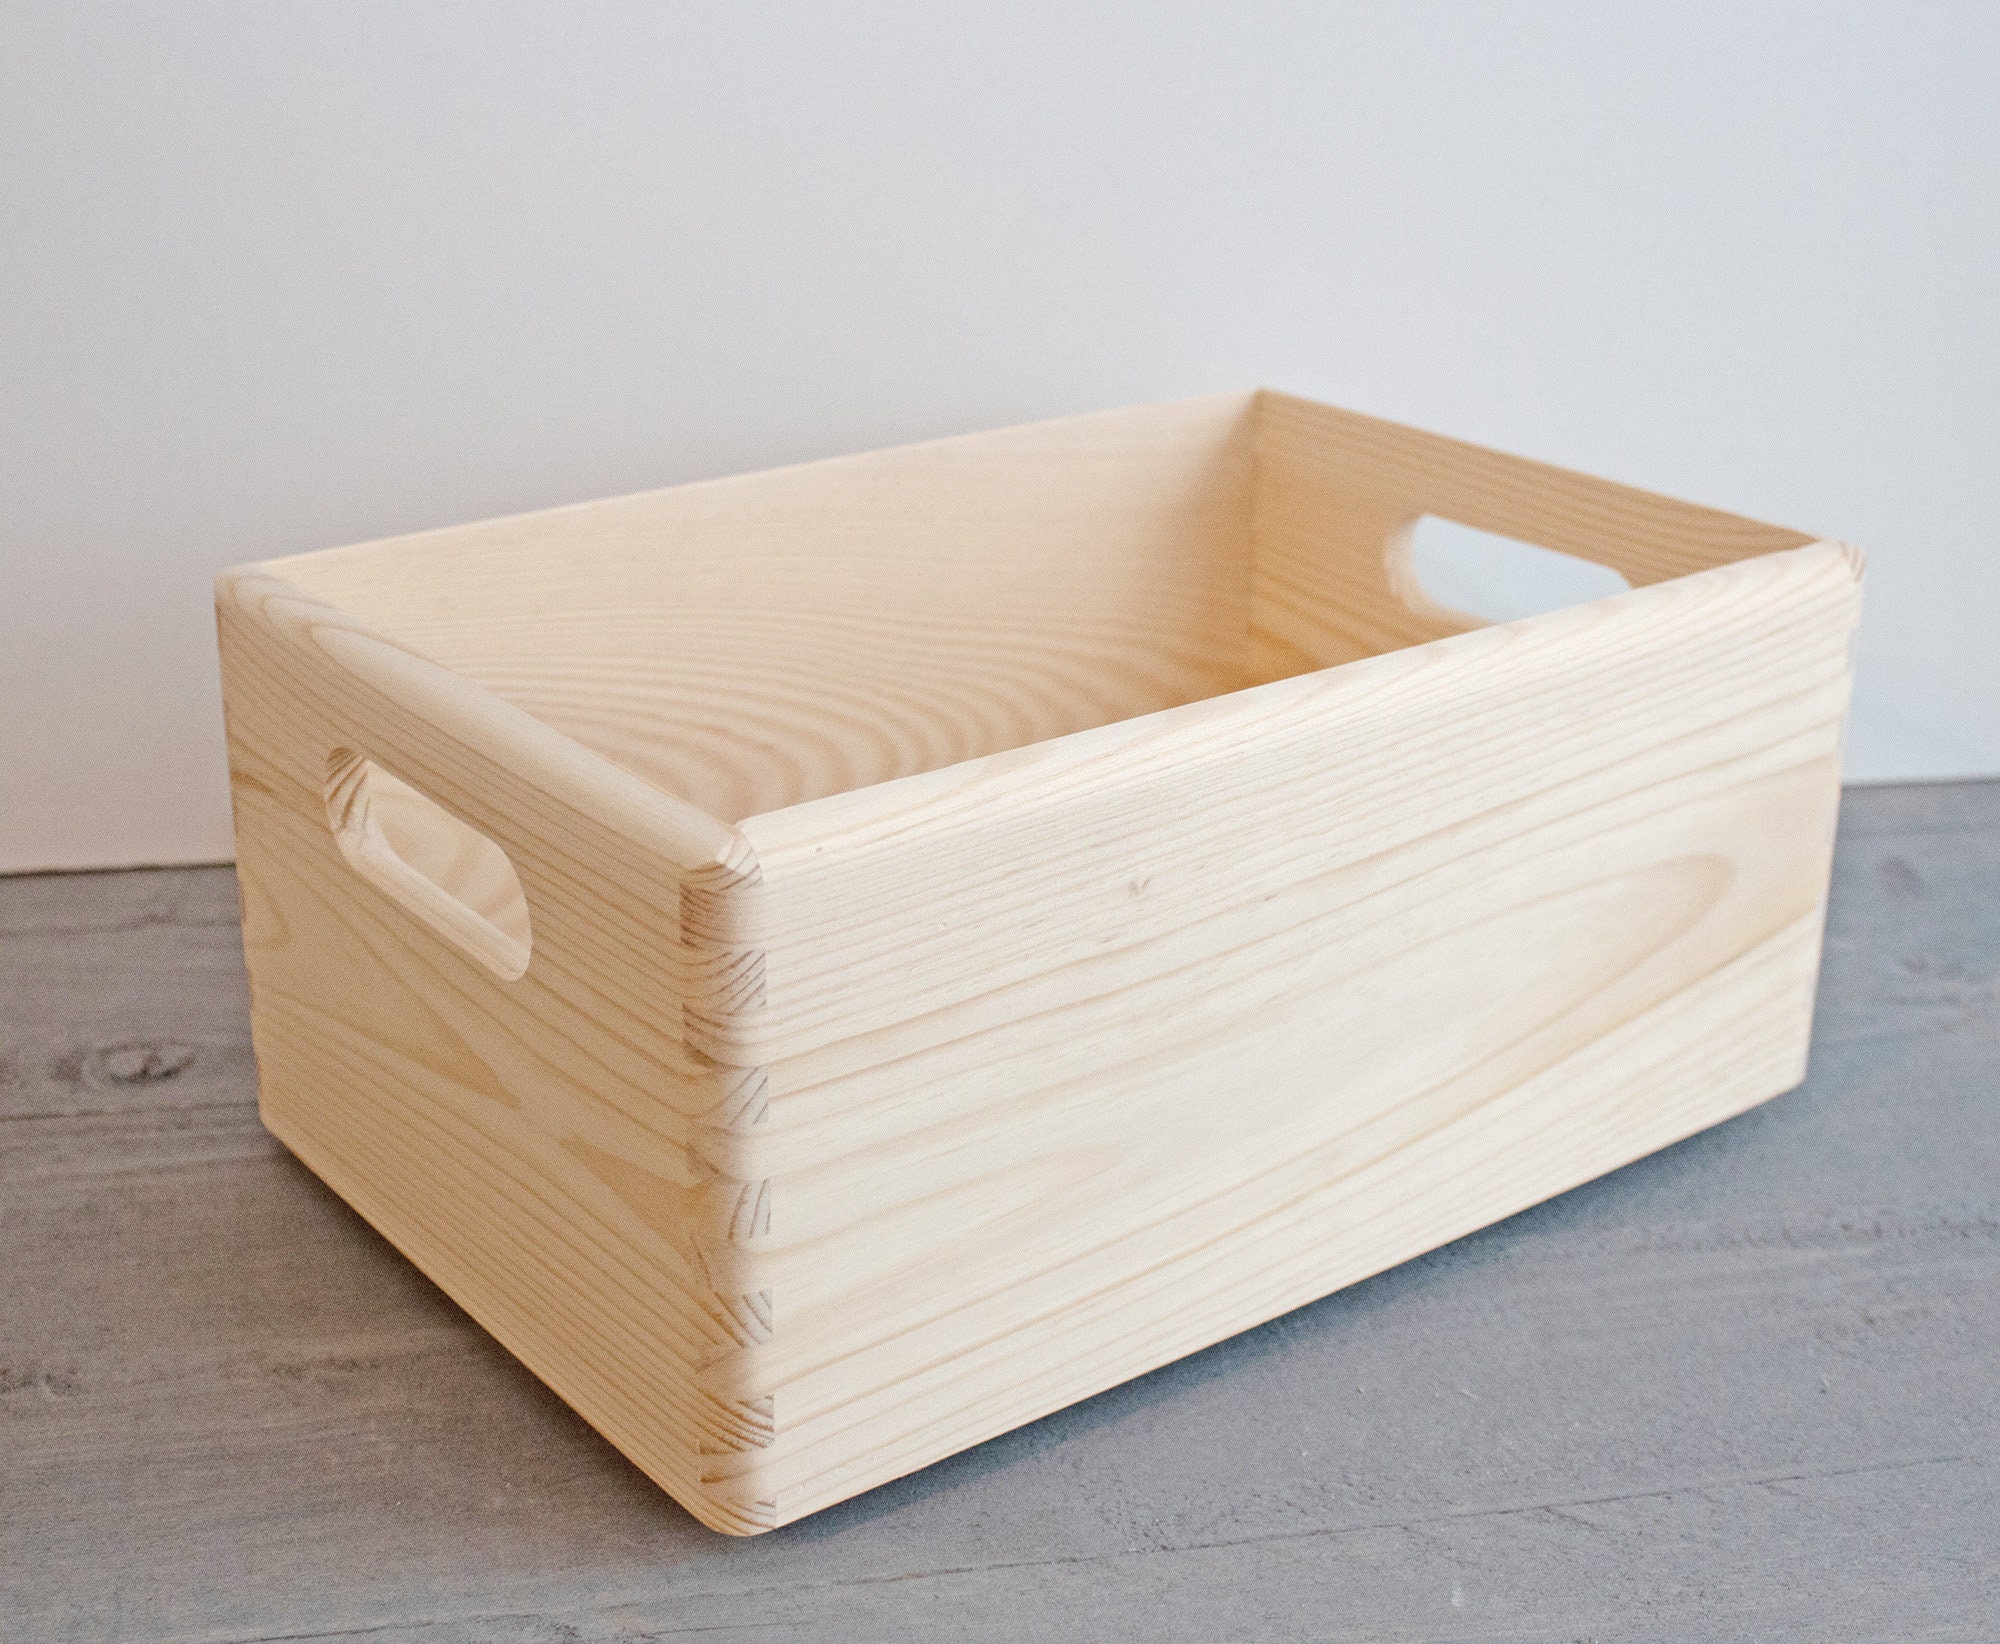 3x Wooden Box Hinged Jewelry Crafts Storage Case Container